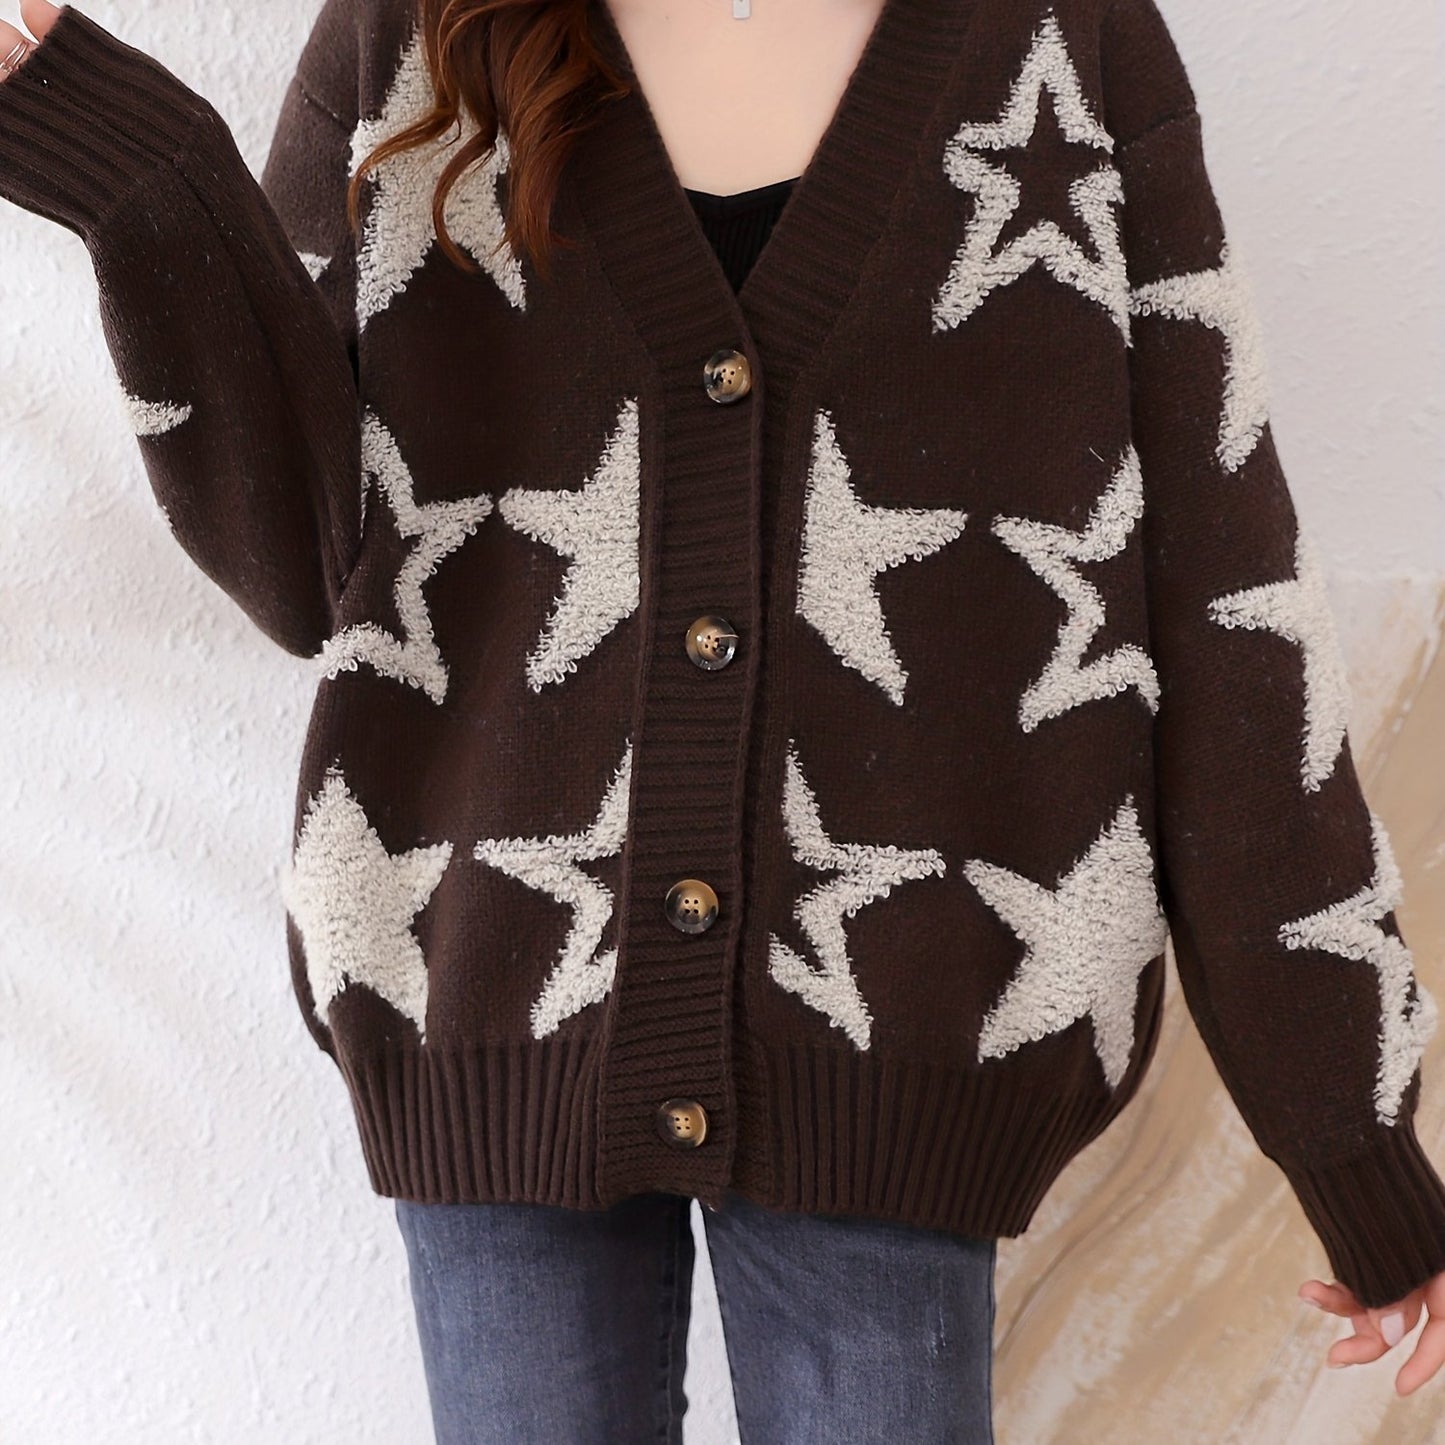 Antmvs Star Pattern V Neck Button Cardigan, Elegant Long Sleeve Sweater For Fall & Winter, Women's Clothing